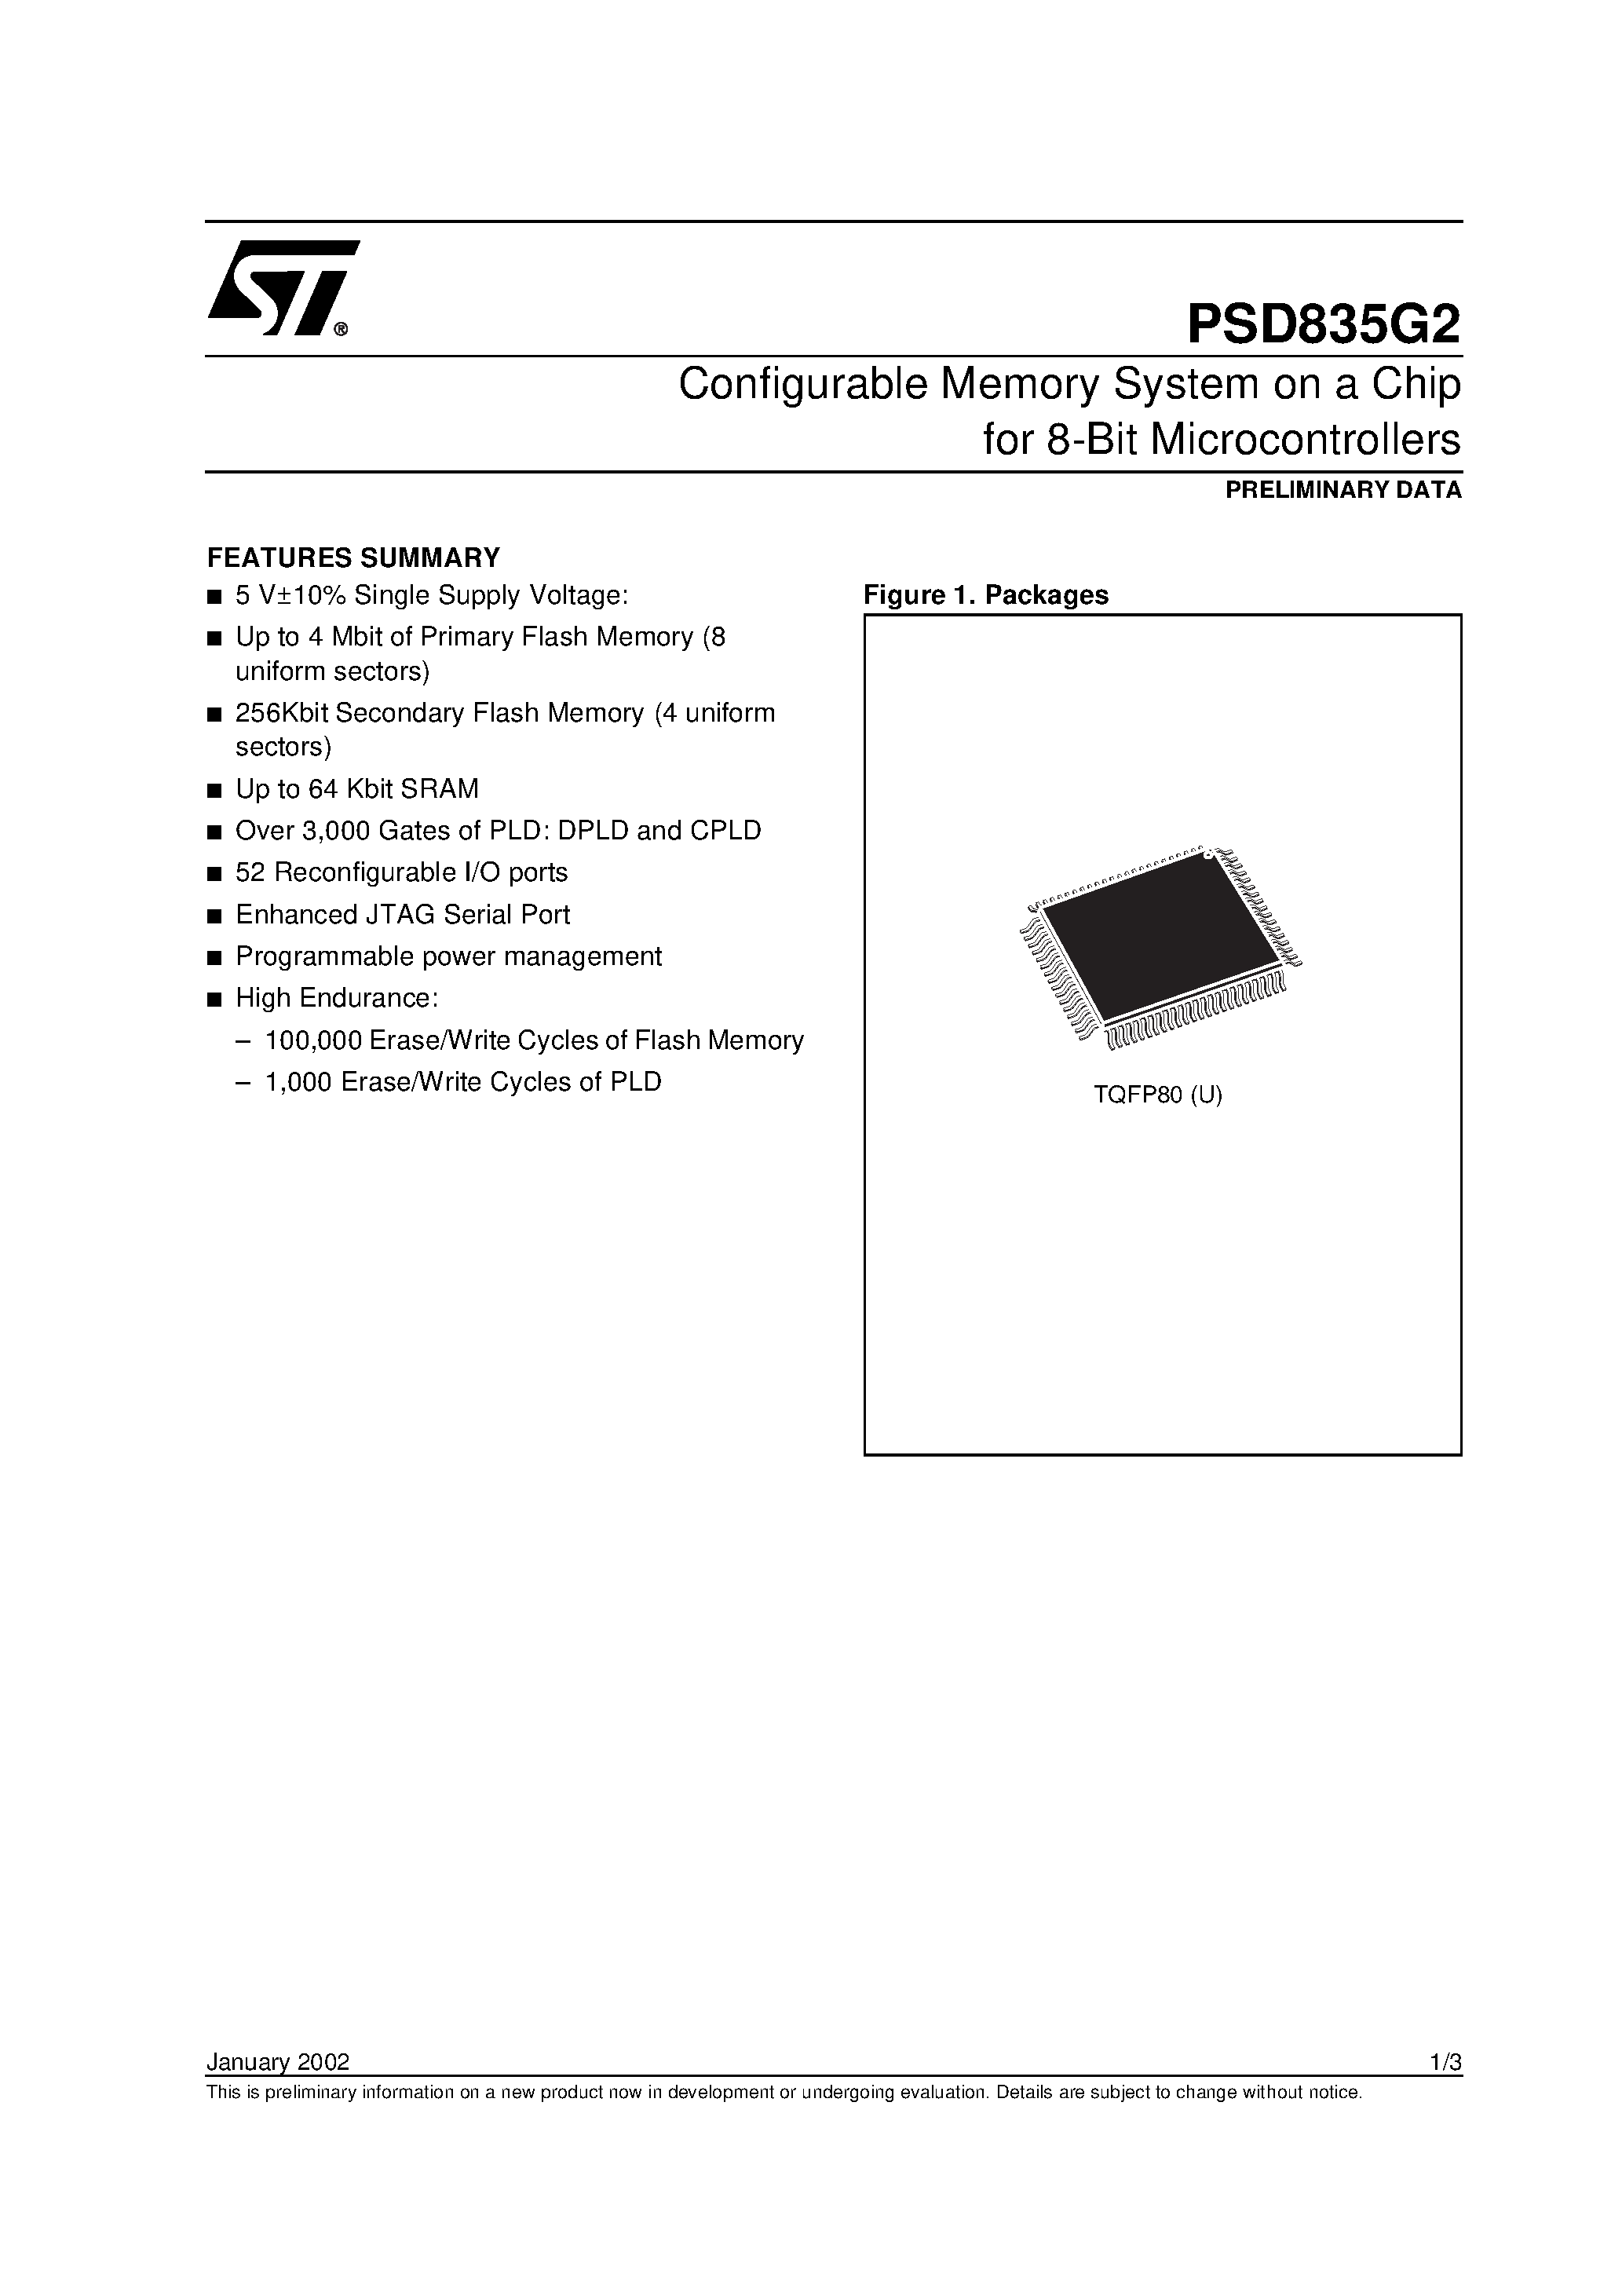 Datasheet PSD835F1-A-12J - Configurable Memory System on a Chip for 8-Bit Microcontrollers page 1